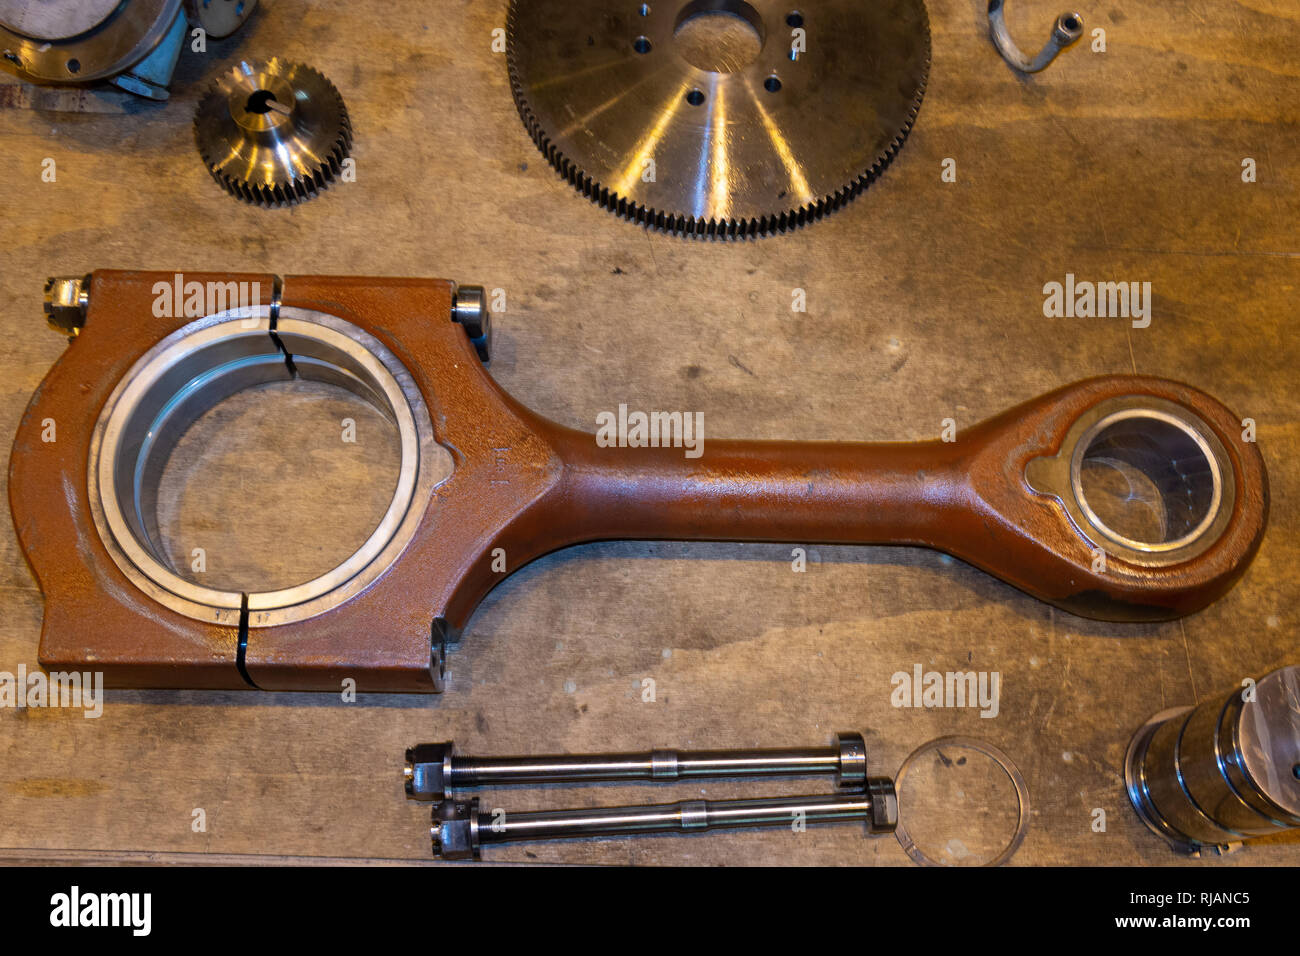 Heavy industrial connecting rod in repair, normally in use for energy supply Stock Photo